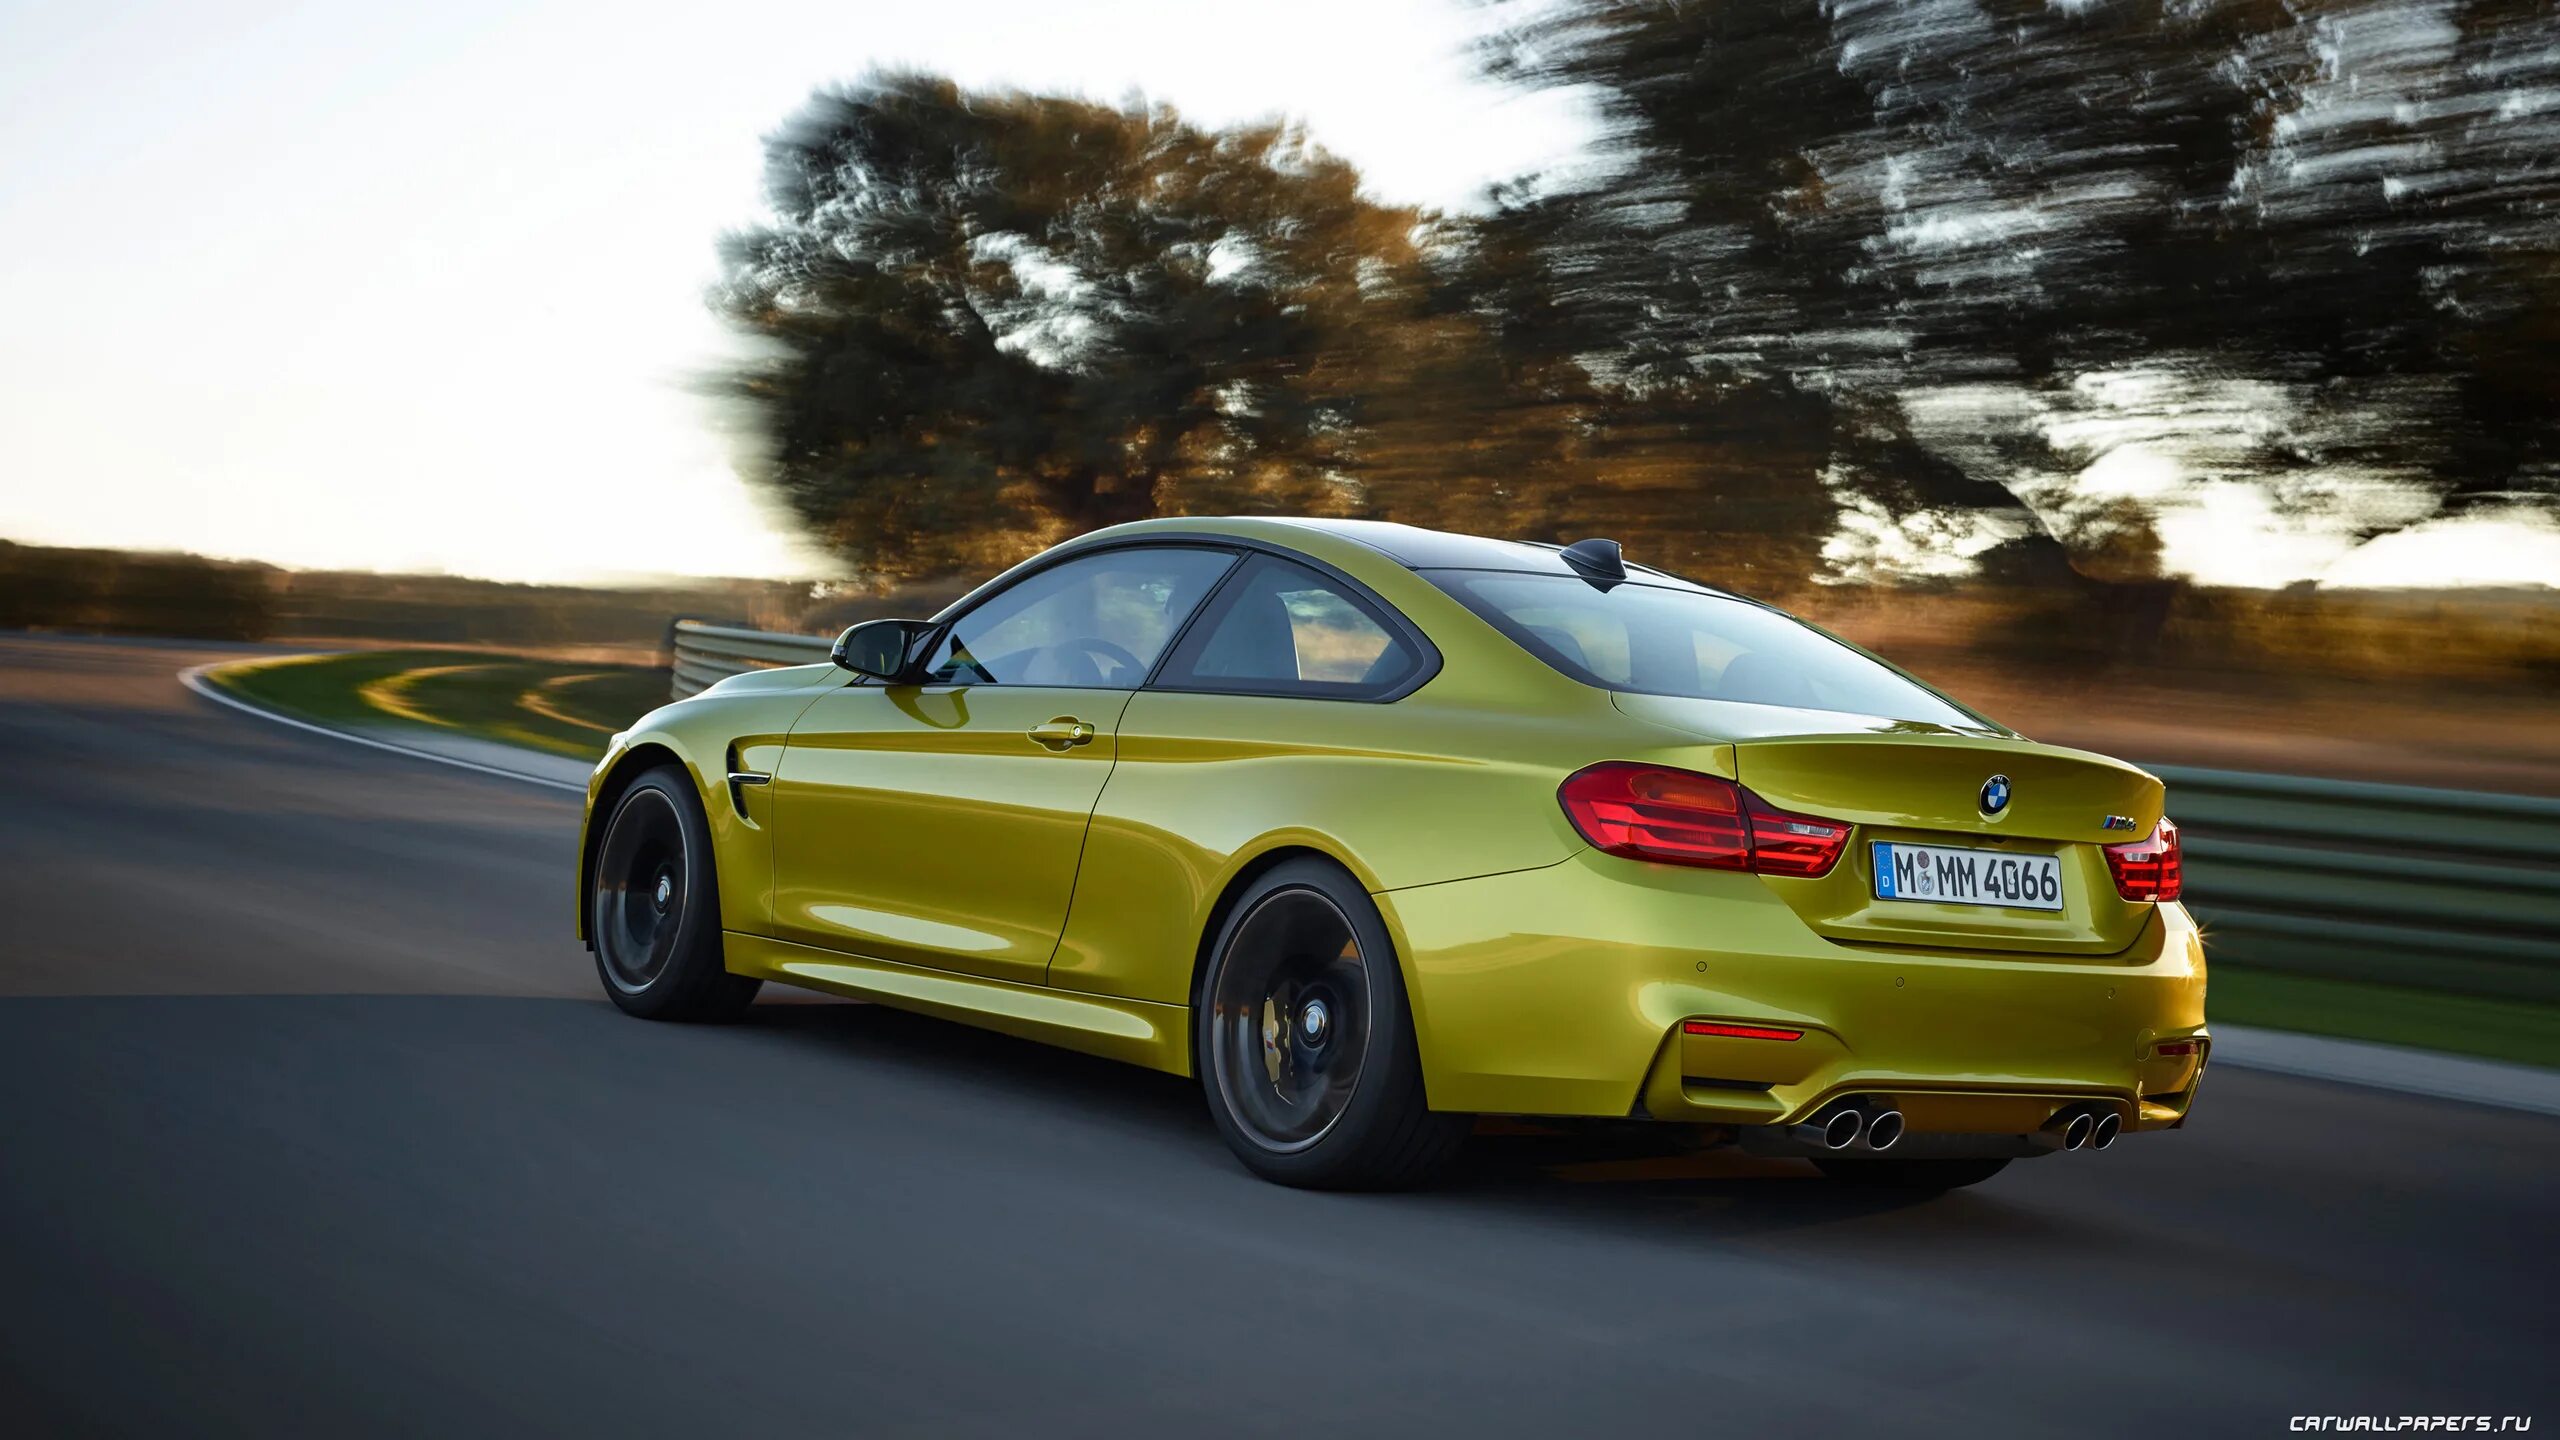 Bmw m4 coupe. BMW m4 2015. BMW m4 купе. 2015 BMW m4 Coupe. BMW m4 Coupe 2016.